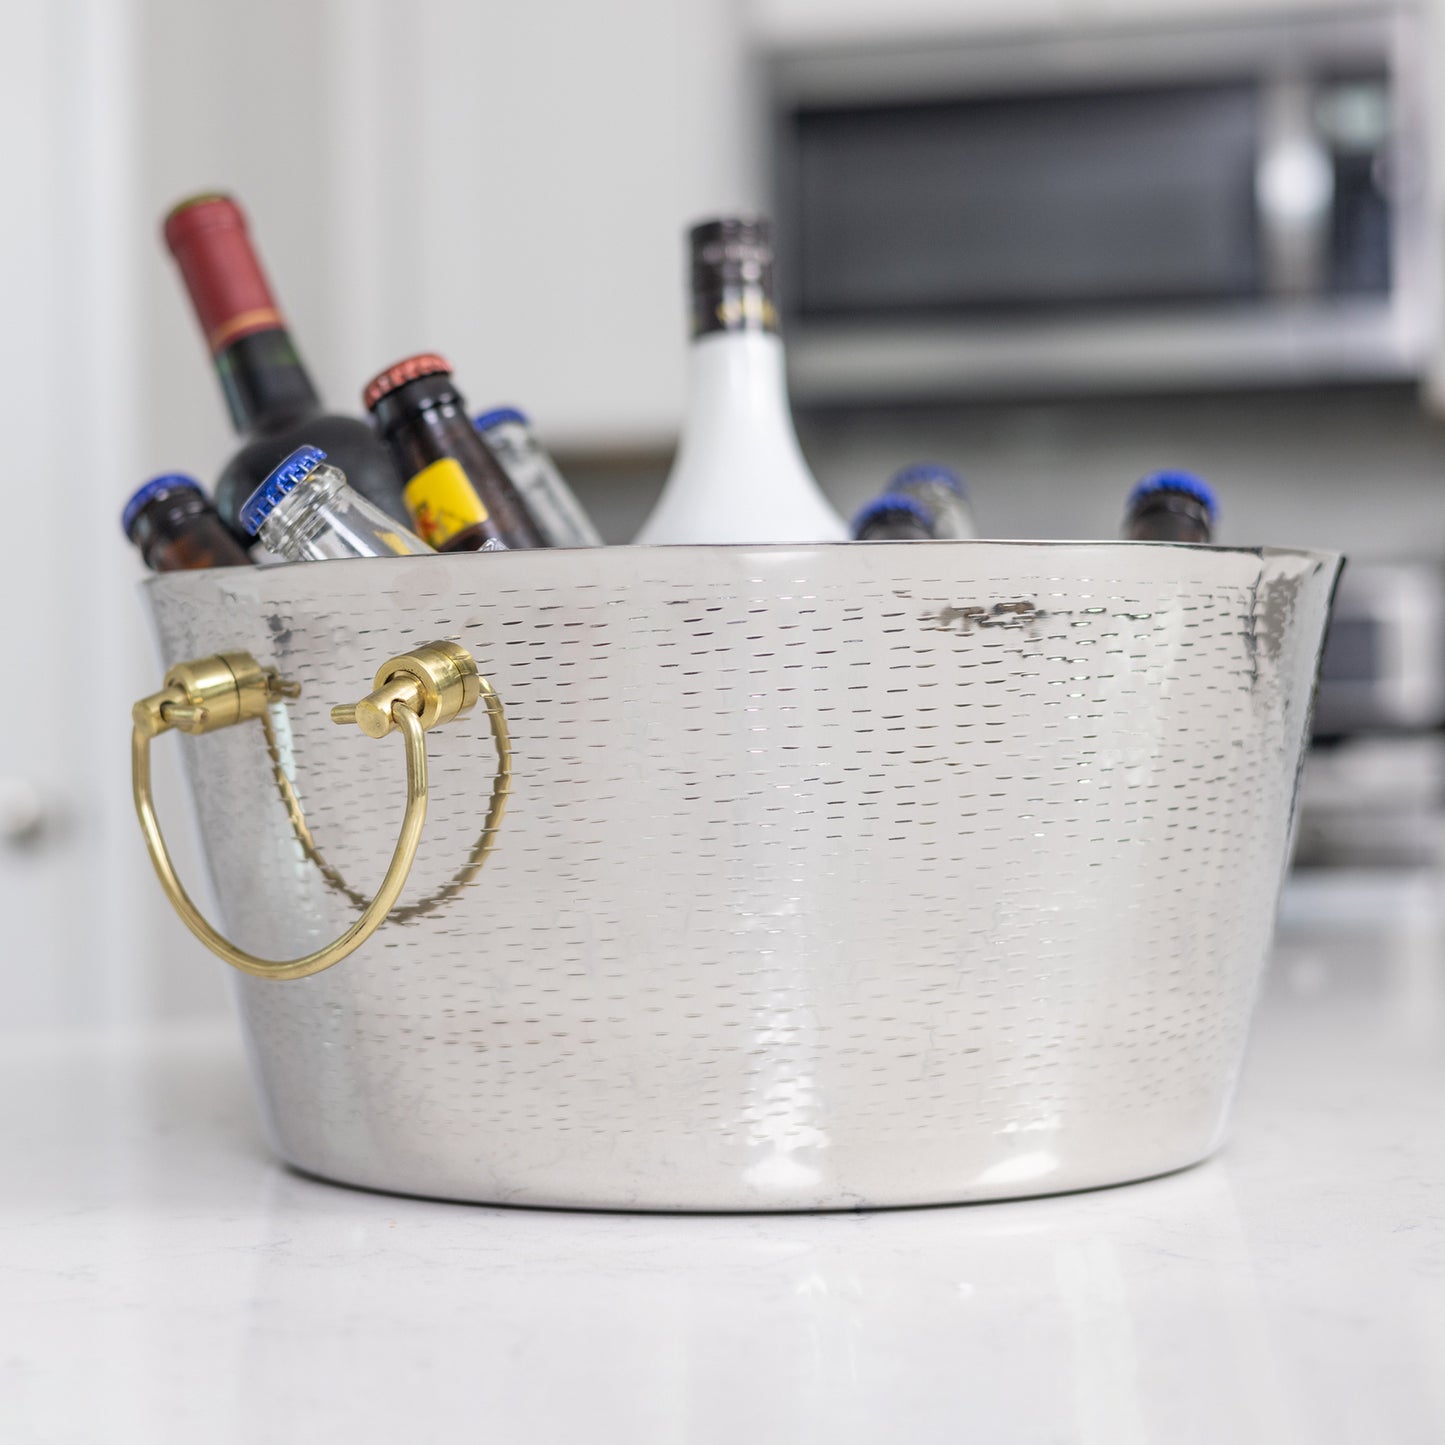 Round ice bucket with gold double hinged handles for easy and safe dumping of ice and water.  Heavy duty construction made of thick food safe stainless steel.  Easy to clean glossy mirrored finish, perfect for entertaining in the home or on the patio.